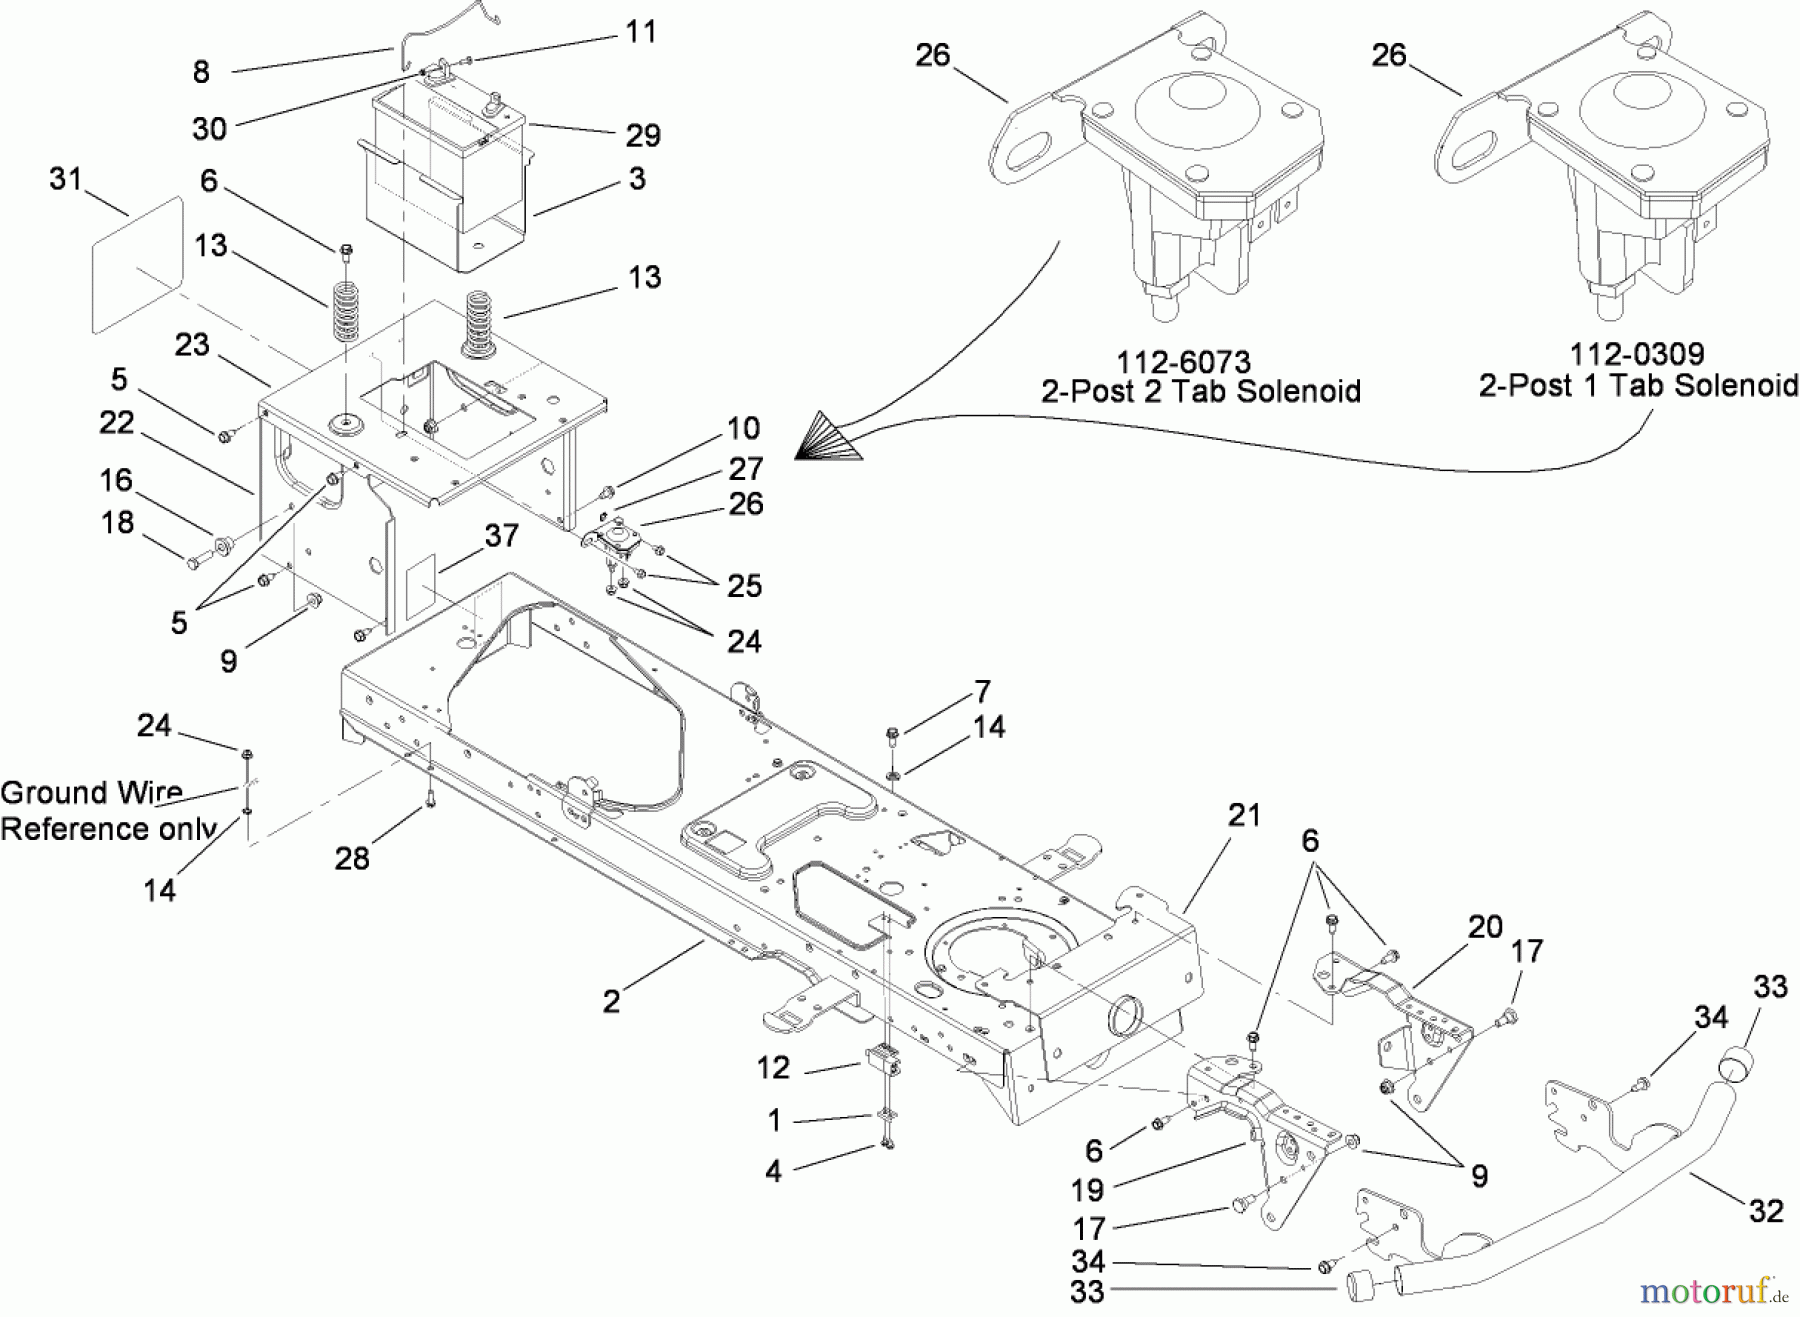  Toro Neu Mowers, Lawn & Garden Tractor Seite 1 13AP62RP544 (SL500) - Toro SL500 Super Lawn Tractor, 2007 (1B157H20701-) FRAME AND BATTERY ASSEMBLY